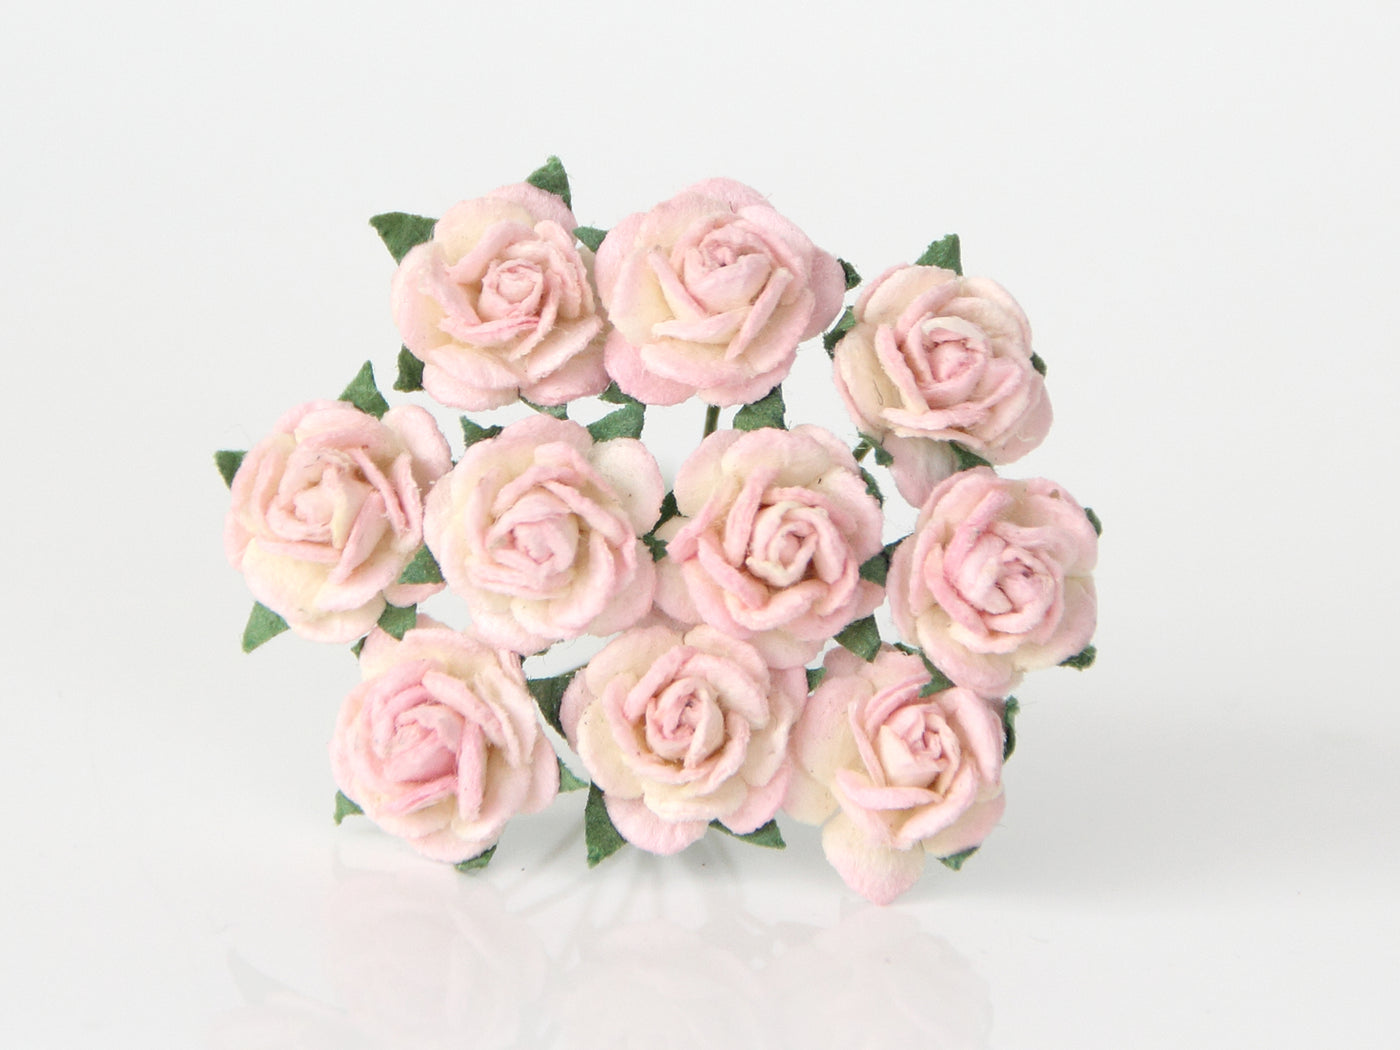 10 Pcs - Mulberry Paper Flowers - 1cm Rounded Petal Roses - Soft Pink and Cream